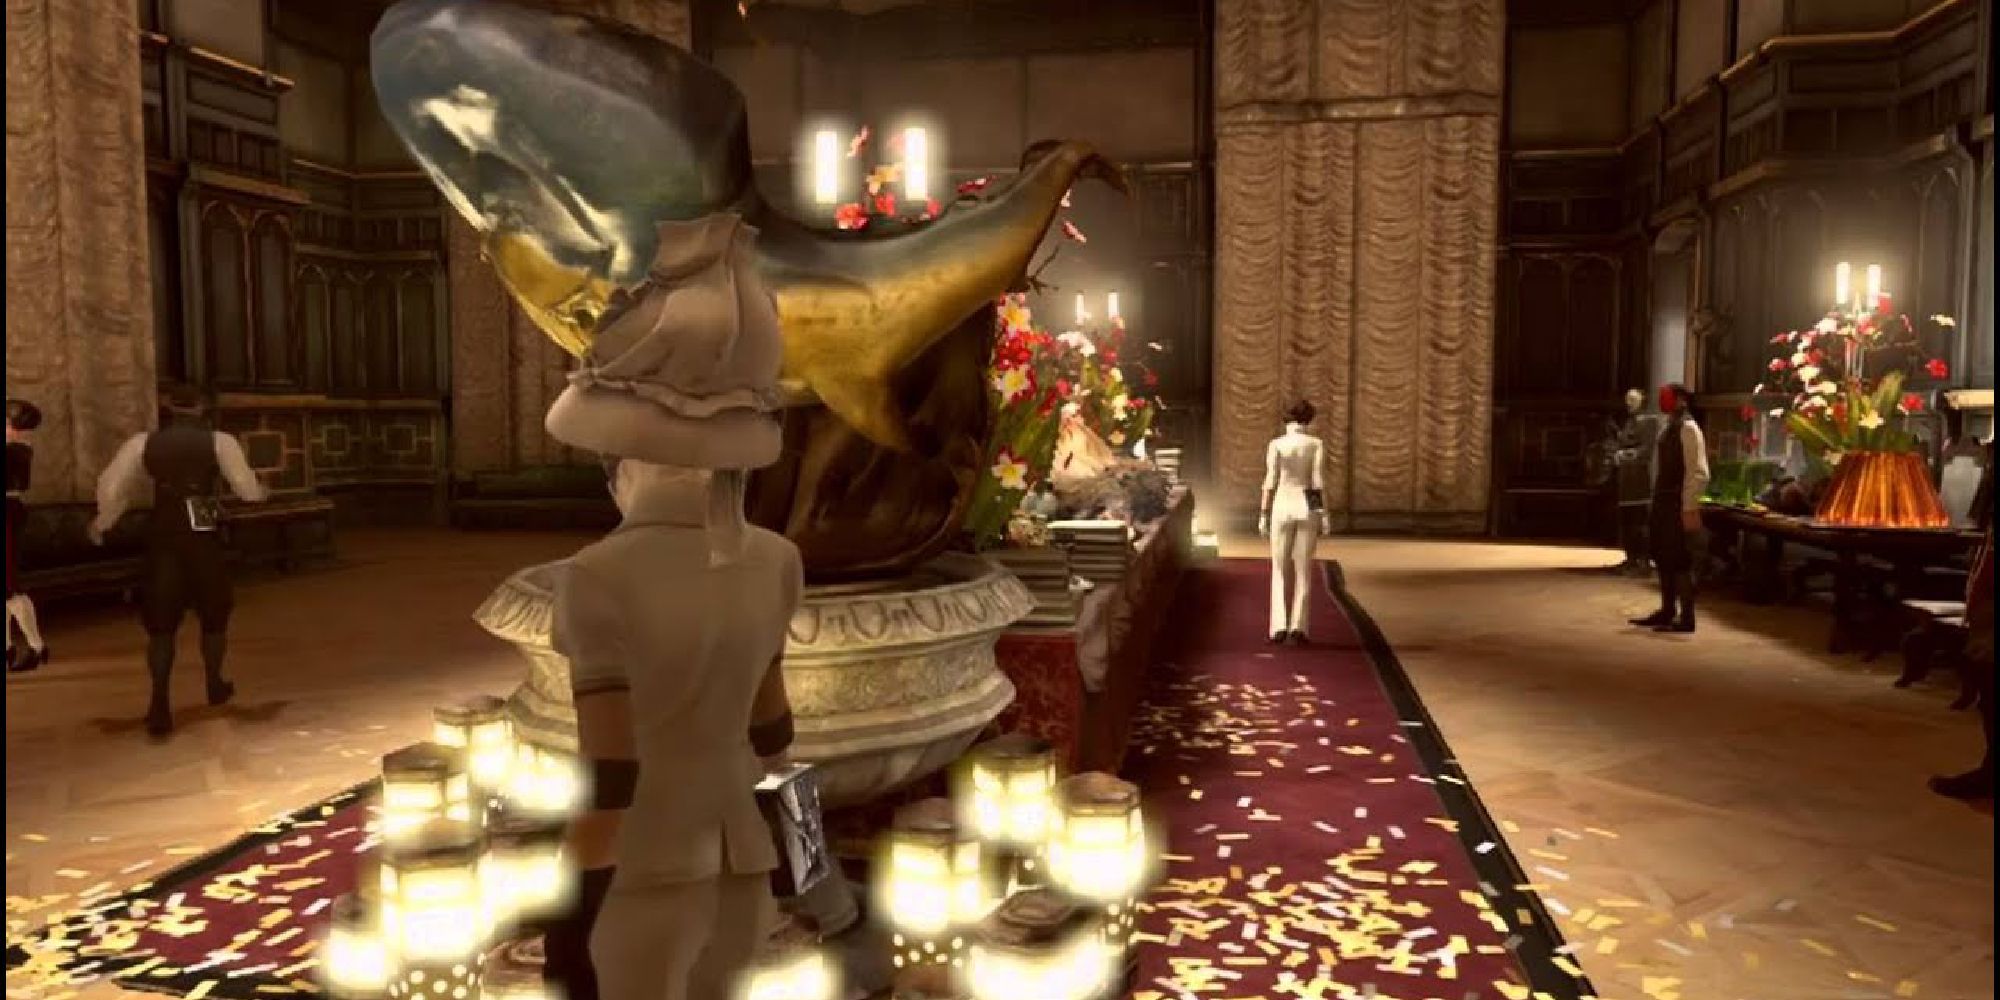 A scene from the Boyle's masquerade featuring guests and decor.